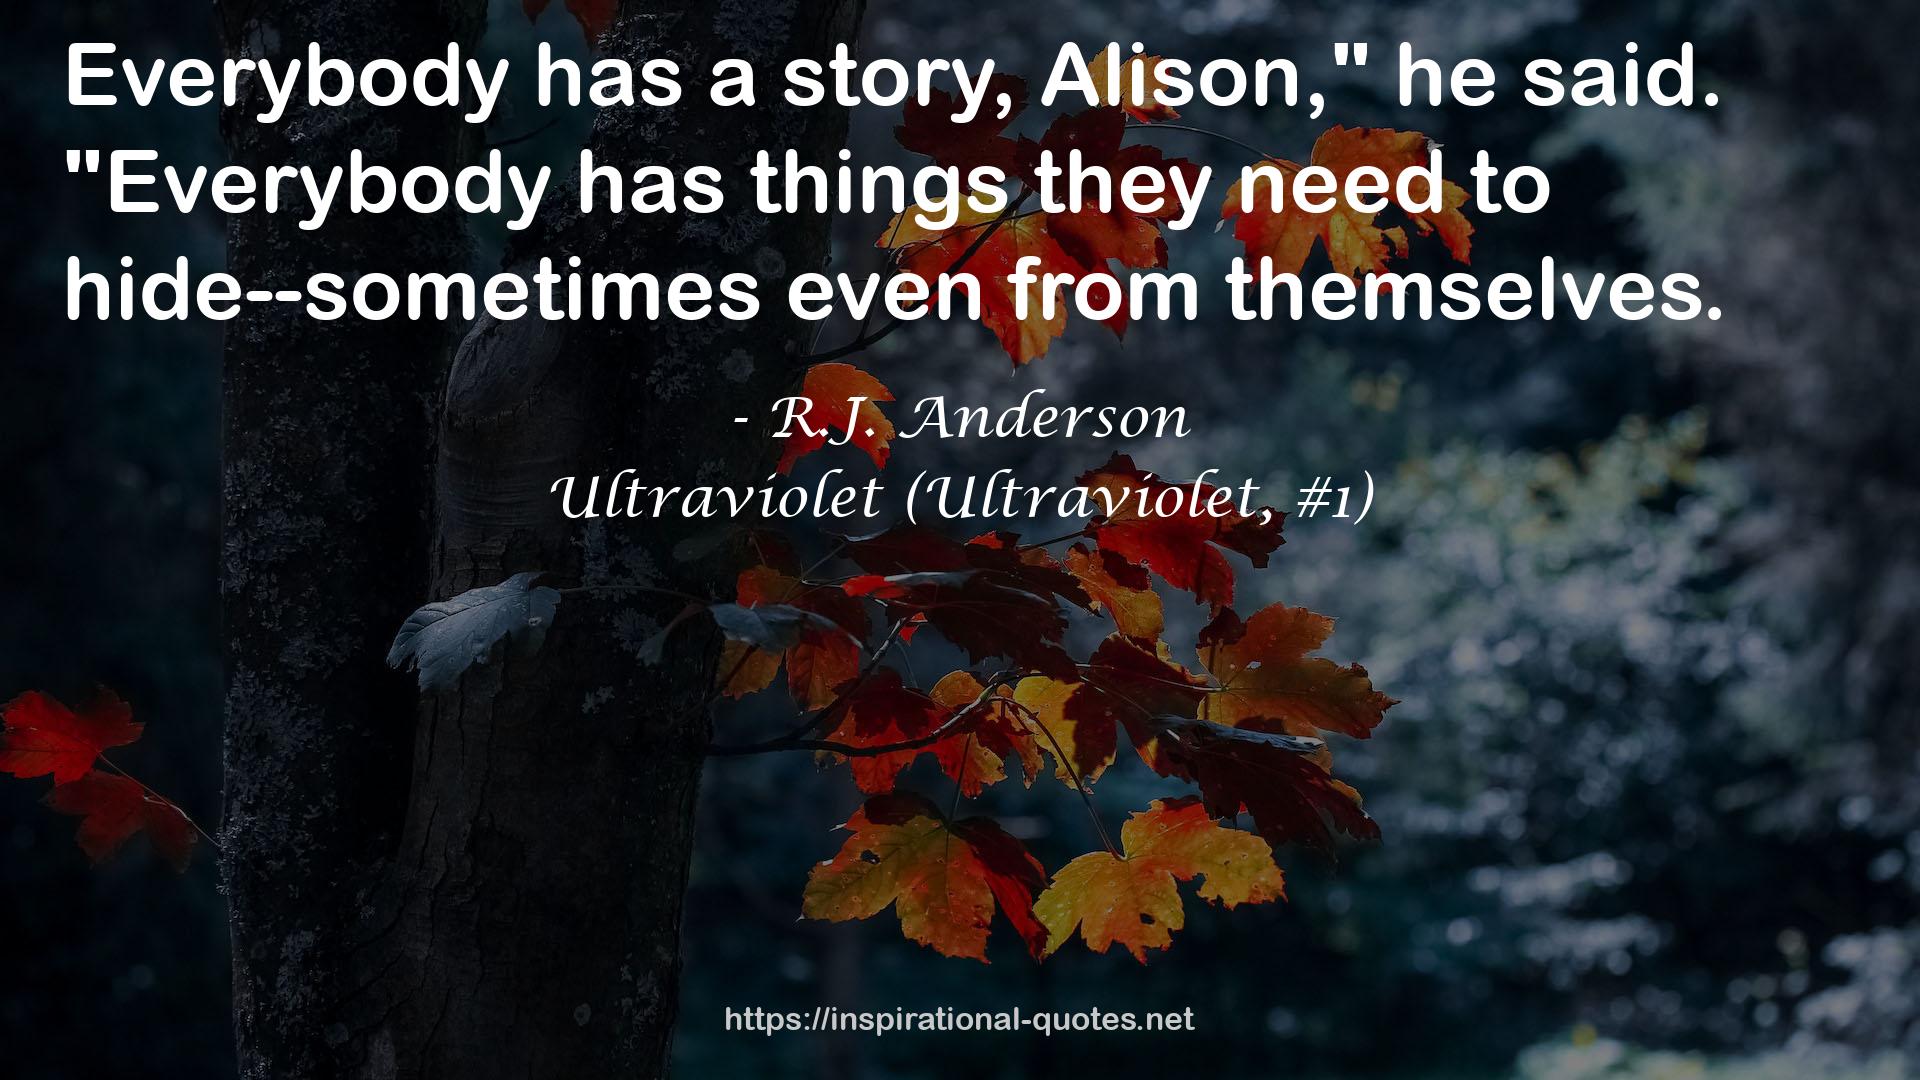 R.J. Anderson QUOTES